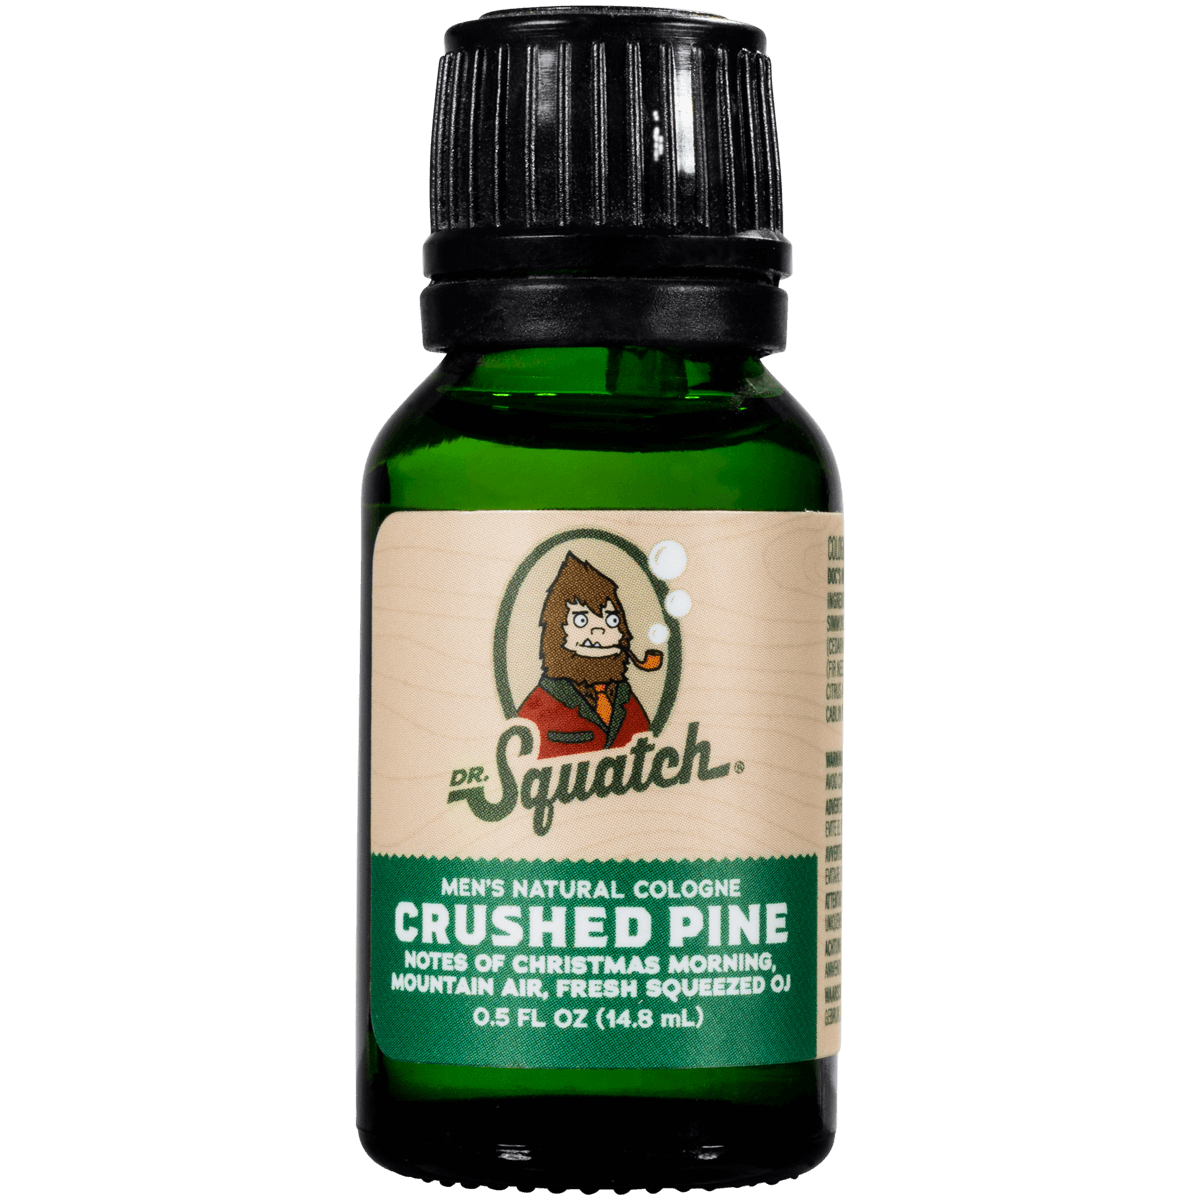 Dr. Squatch Cologne Review: Here's What You Need to Know!